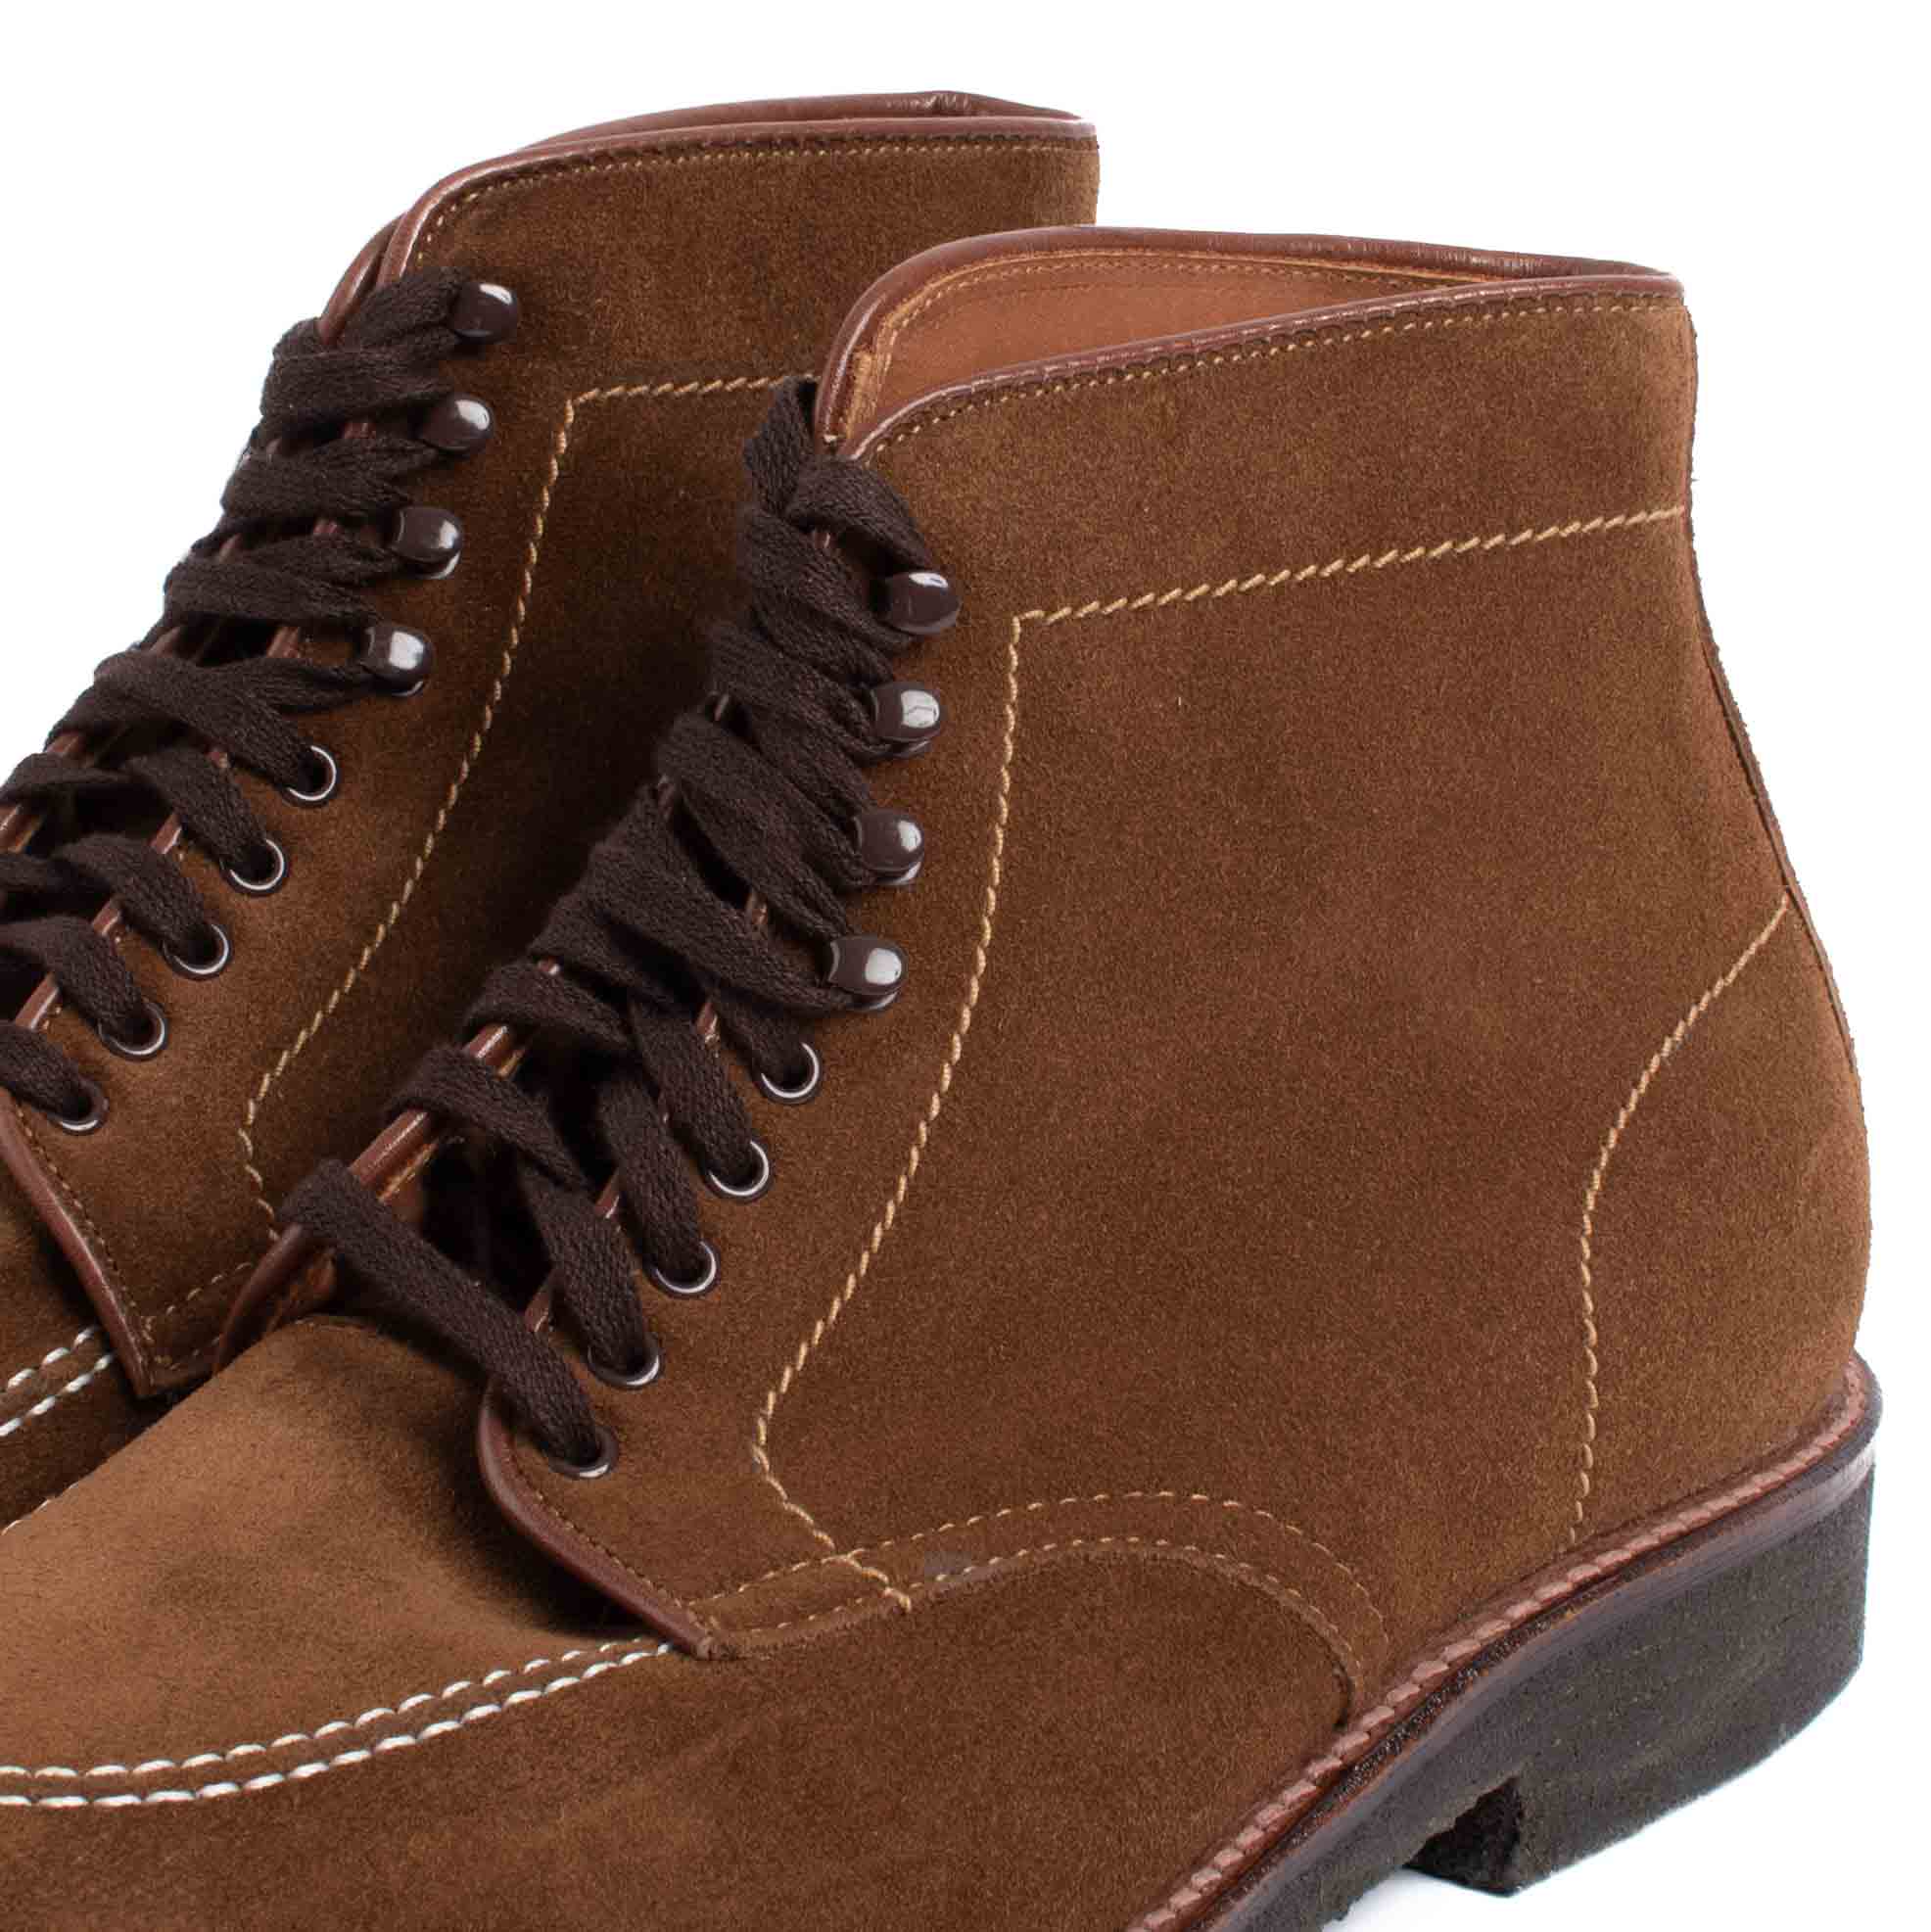 Alden Snuff Suede Indy Boot with Crepe Sole Front